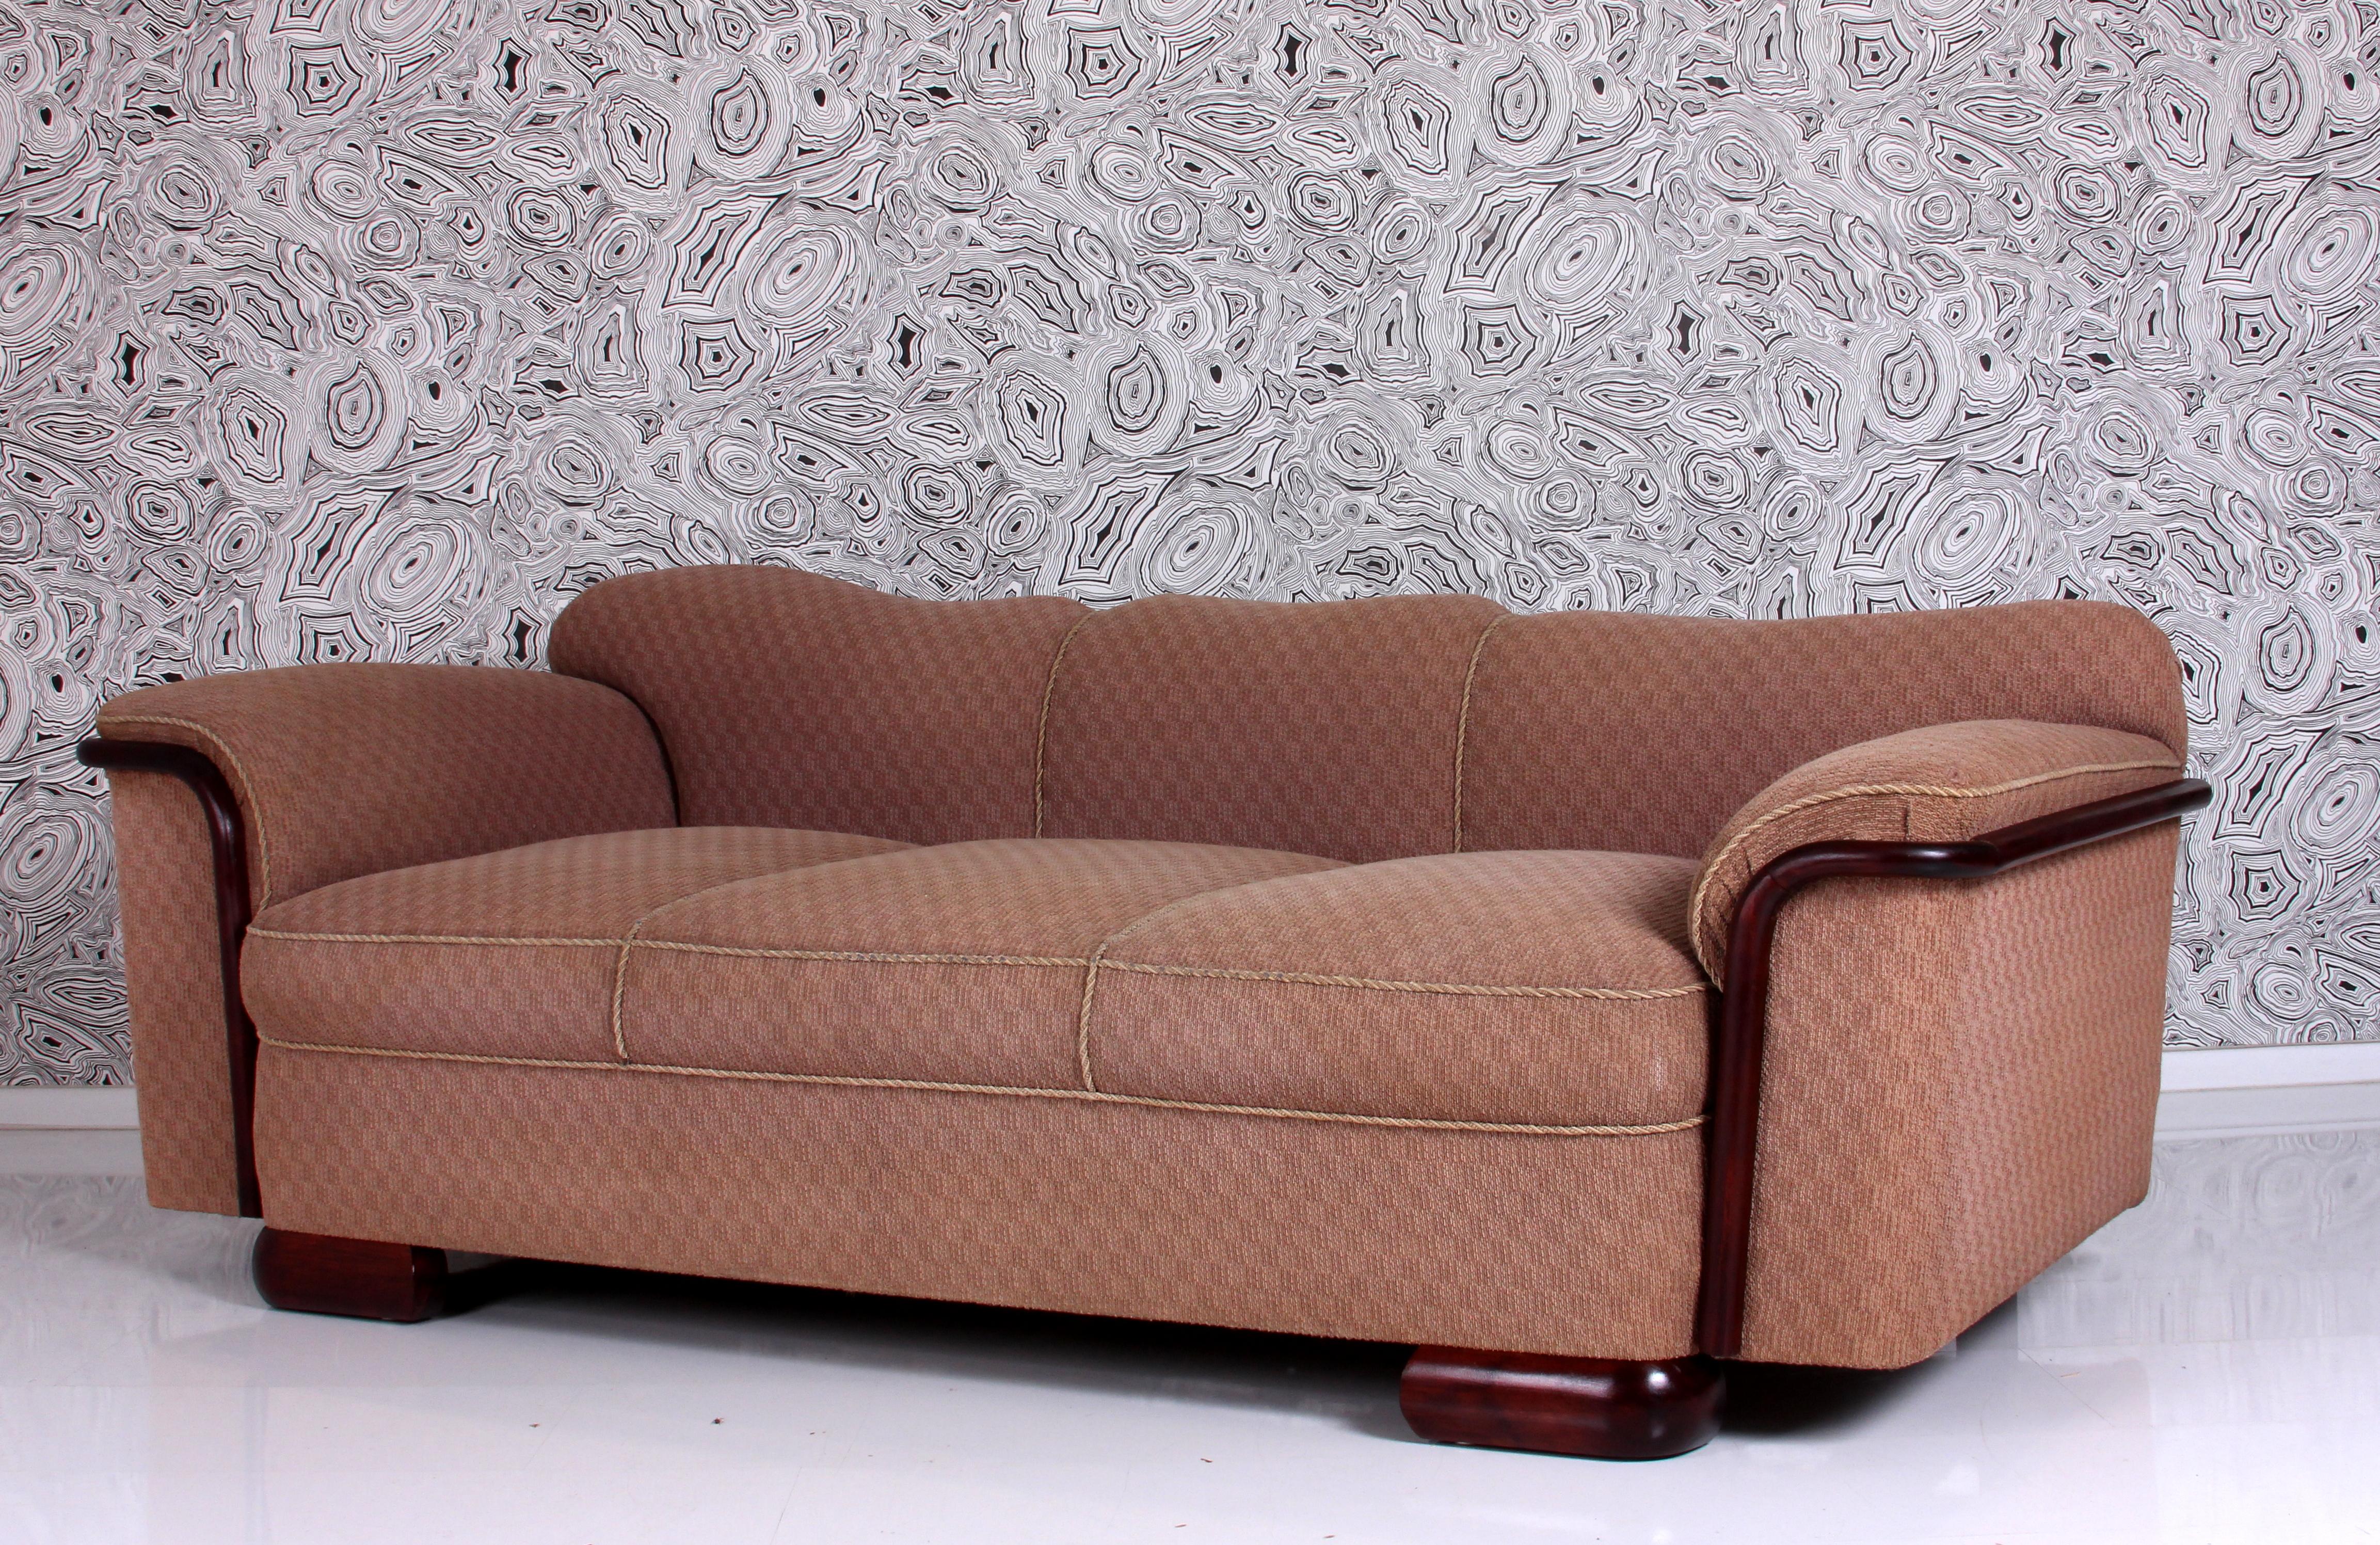 STRAIGHT classic art deco SOFA Dresden around 1930 or. fabric - wood refinished  For Sale 9